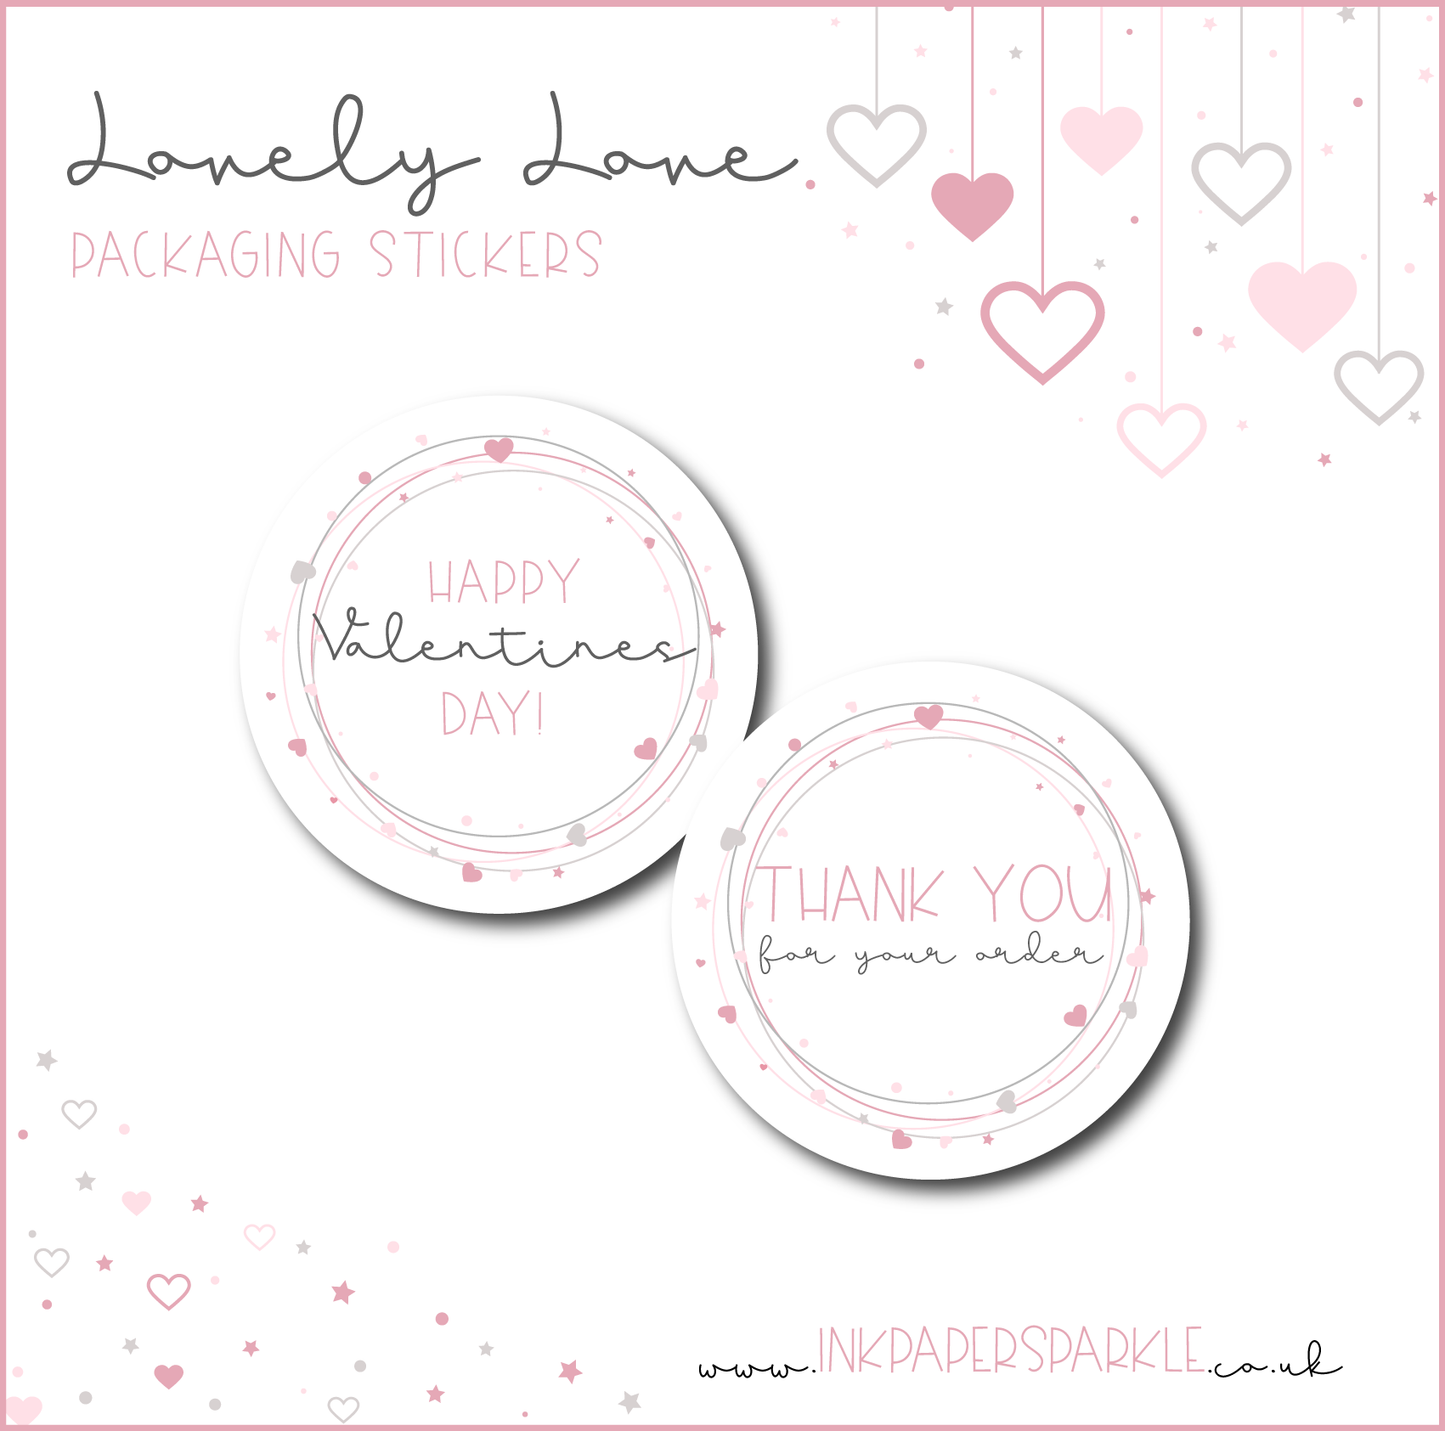 Lovely Love Stickers